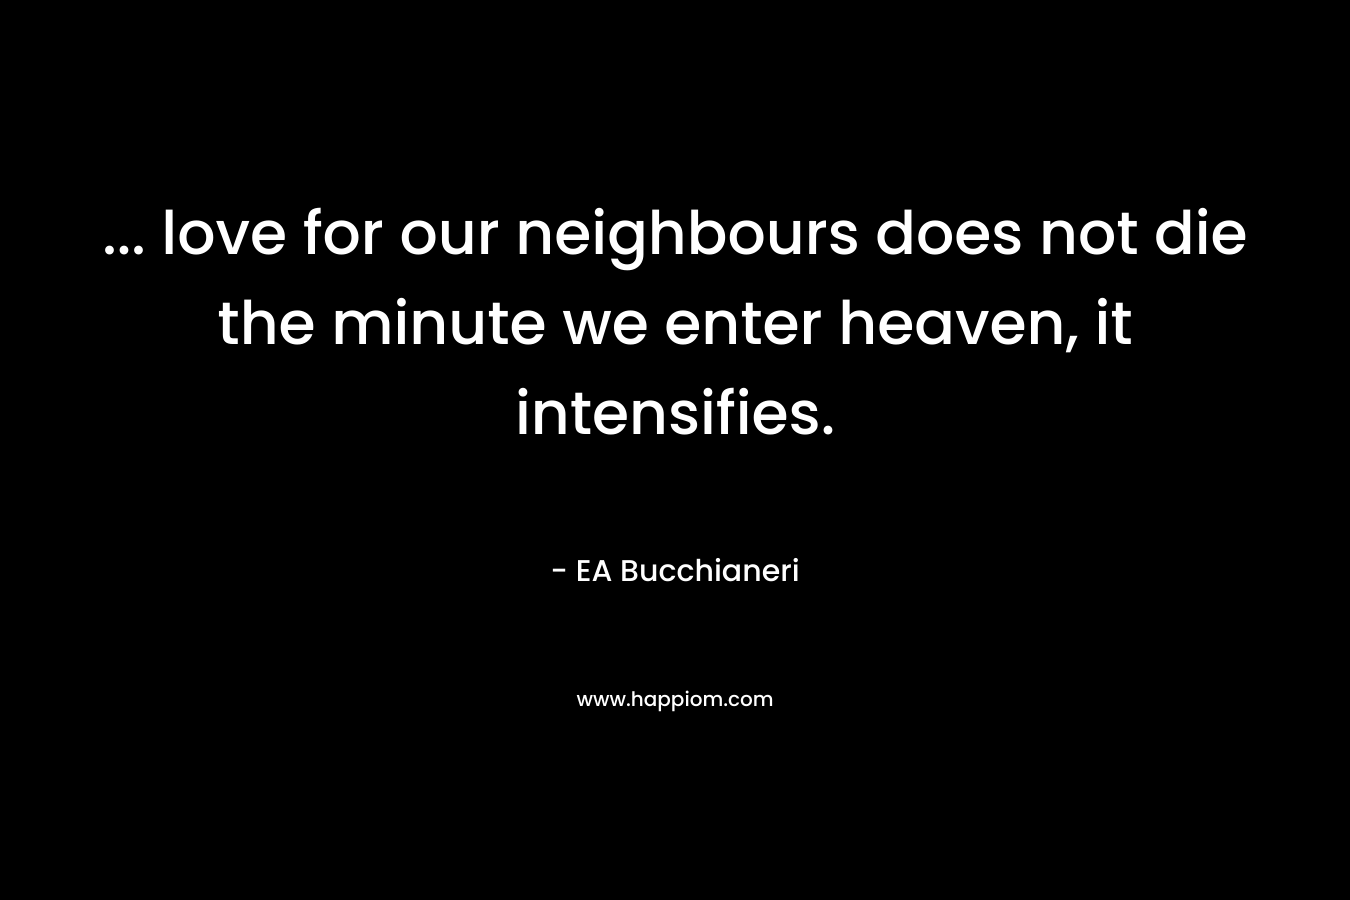 ... love for our neighbours does not die the minute we enter heaven, it intensifies.